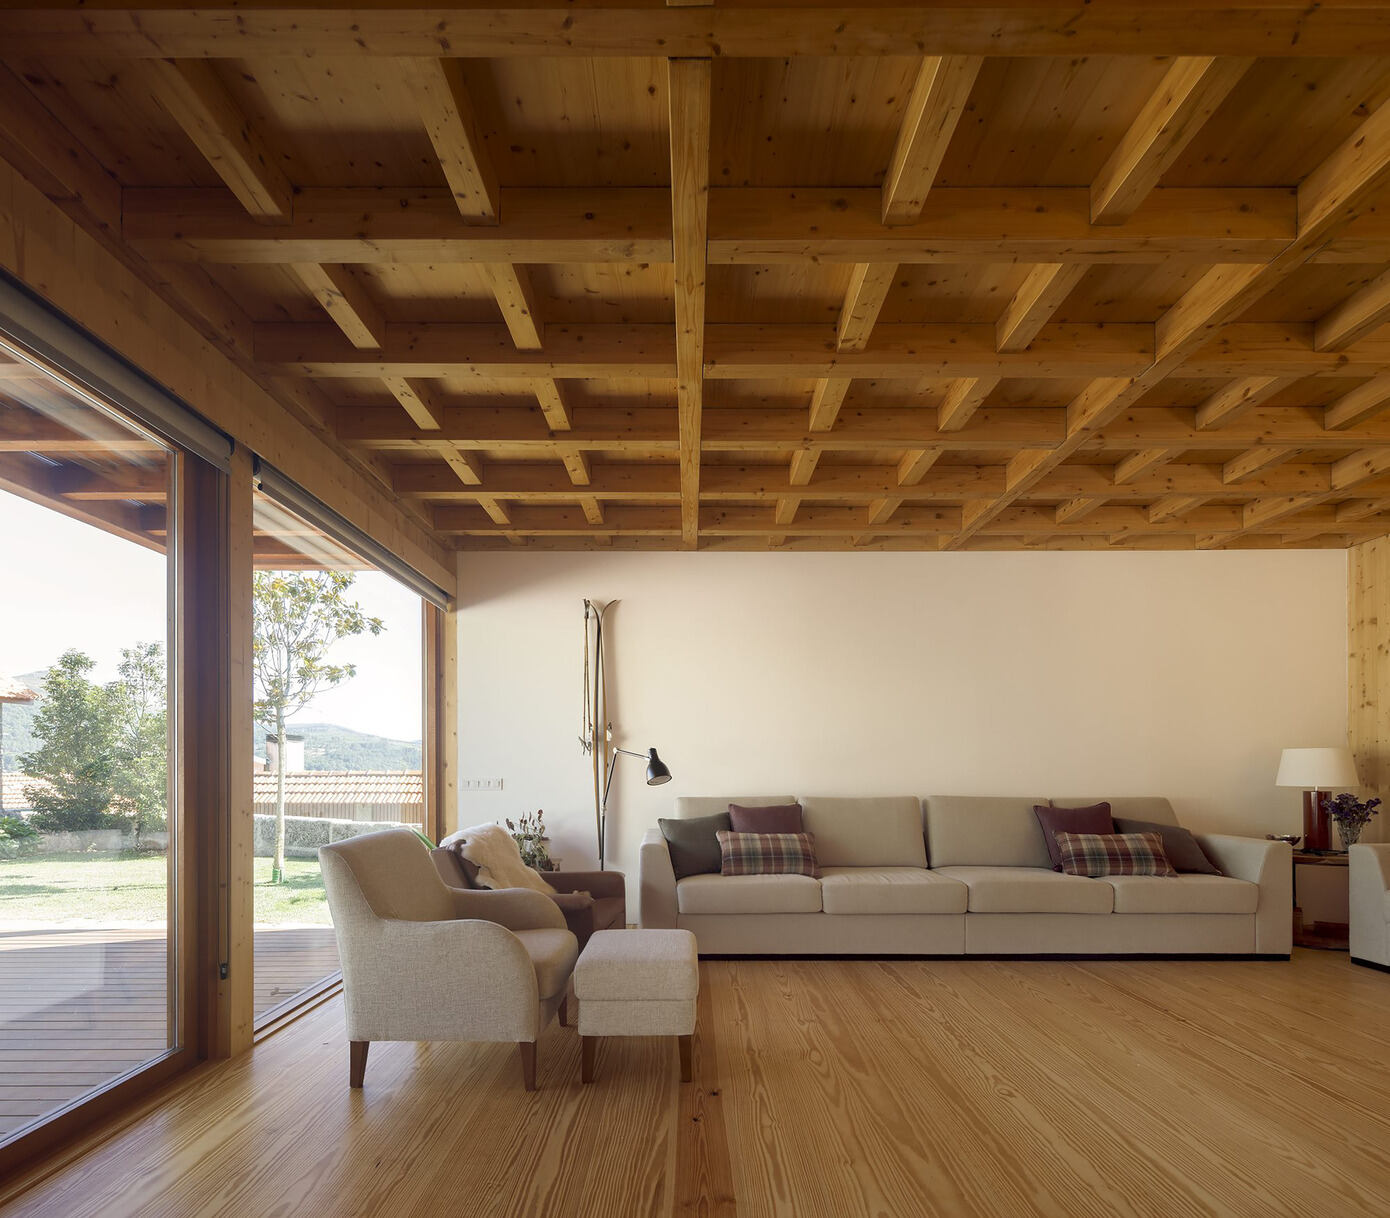 House in Baião: A Wooden Refuge in Portugal